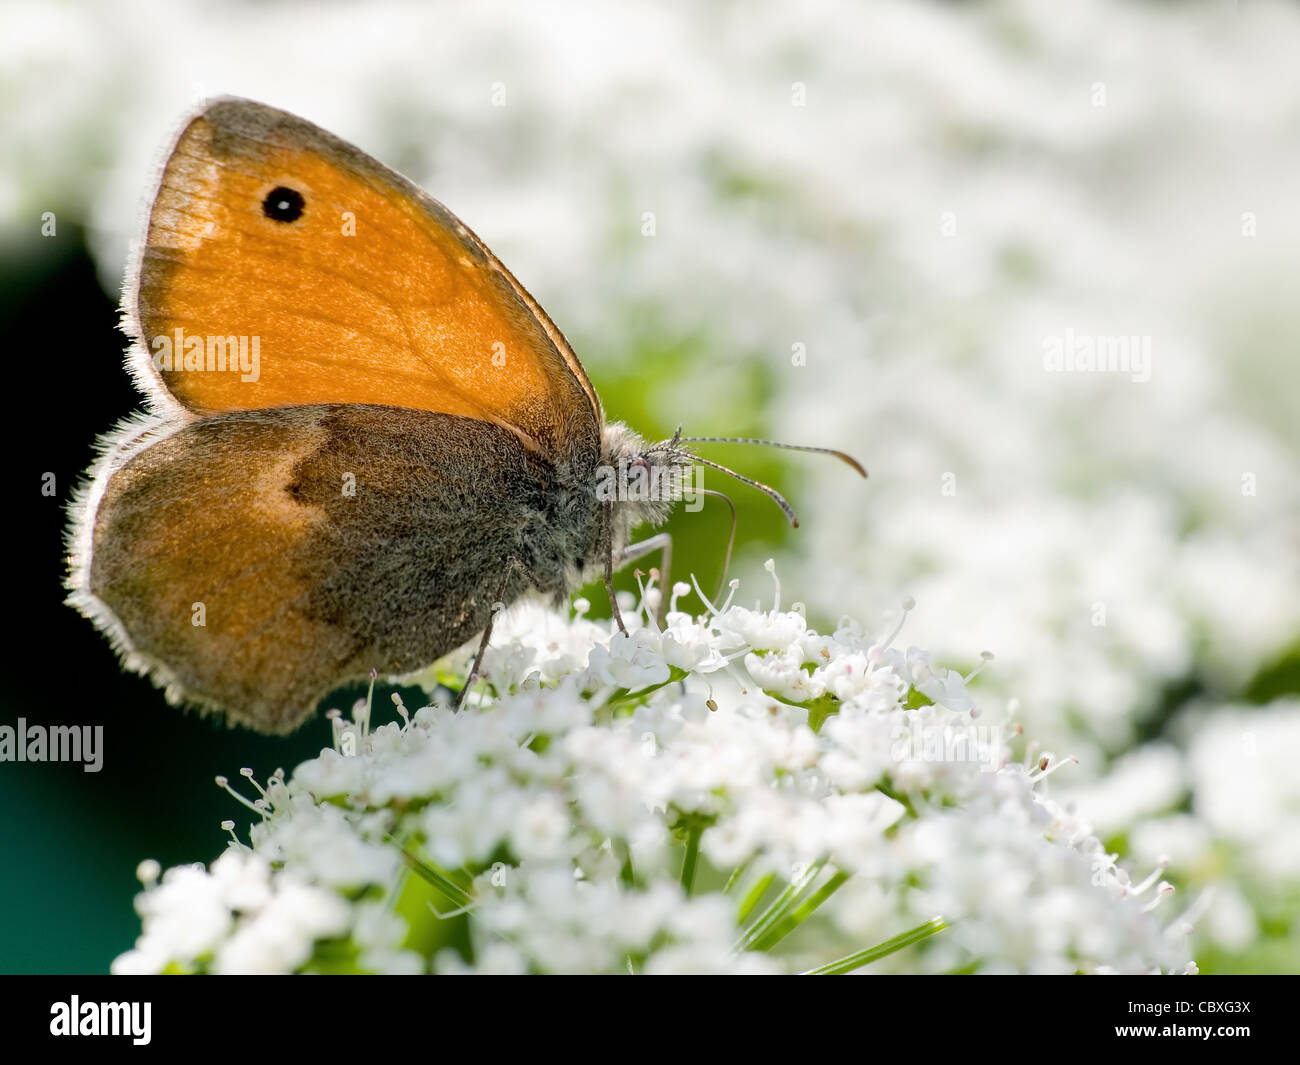 Coenonympha pamphilus butterfly on white flower close up Stock Photo